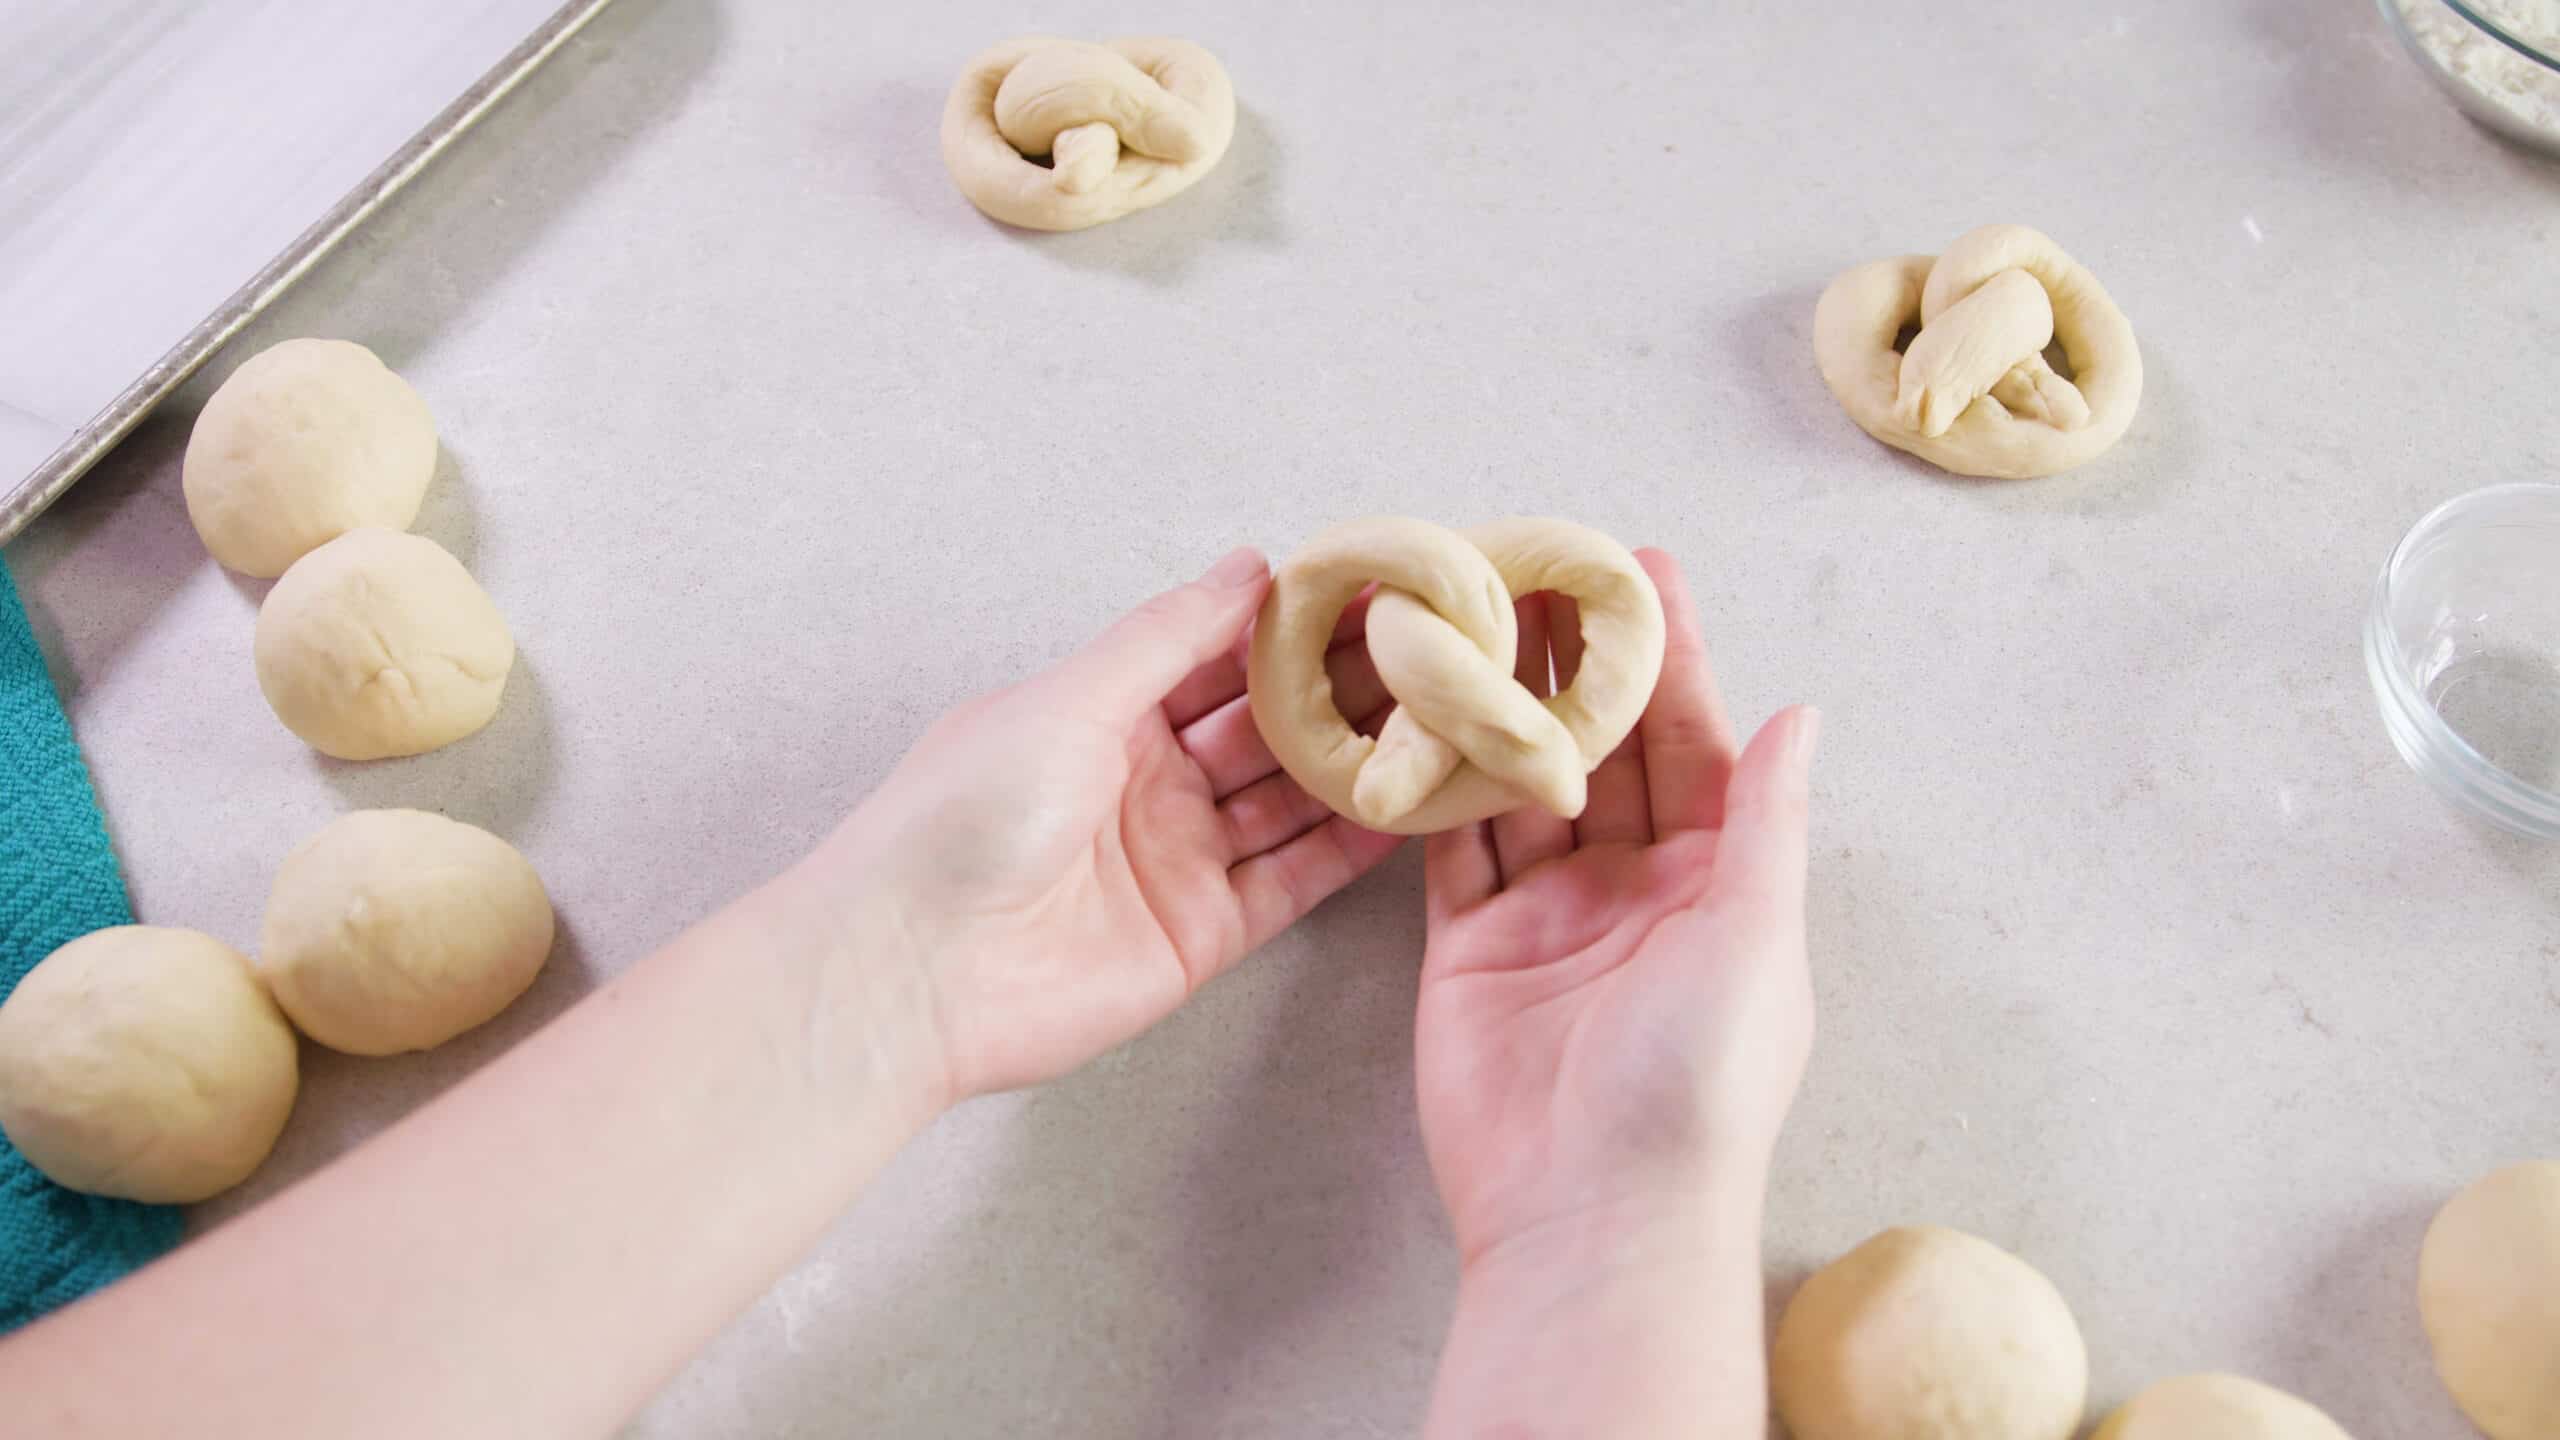 Bird's eye view of clean marble countertop and two hands holding raw dough shaped into a pretzel with other dough balls waiting to be shaped.